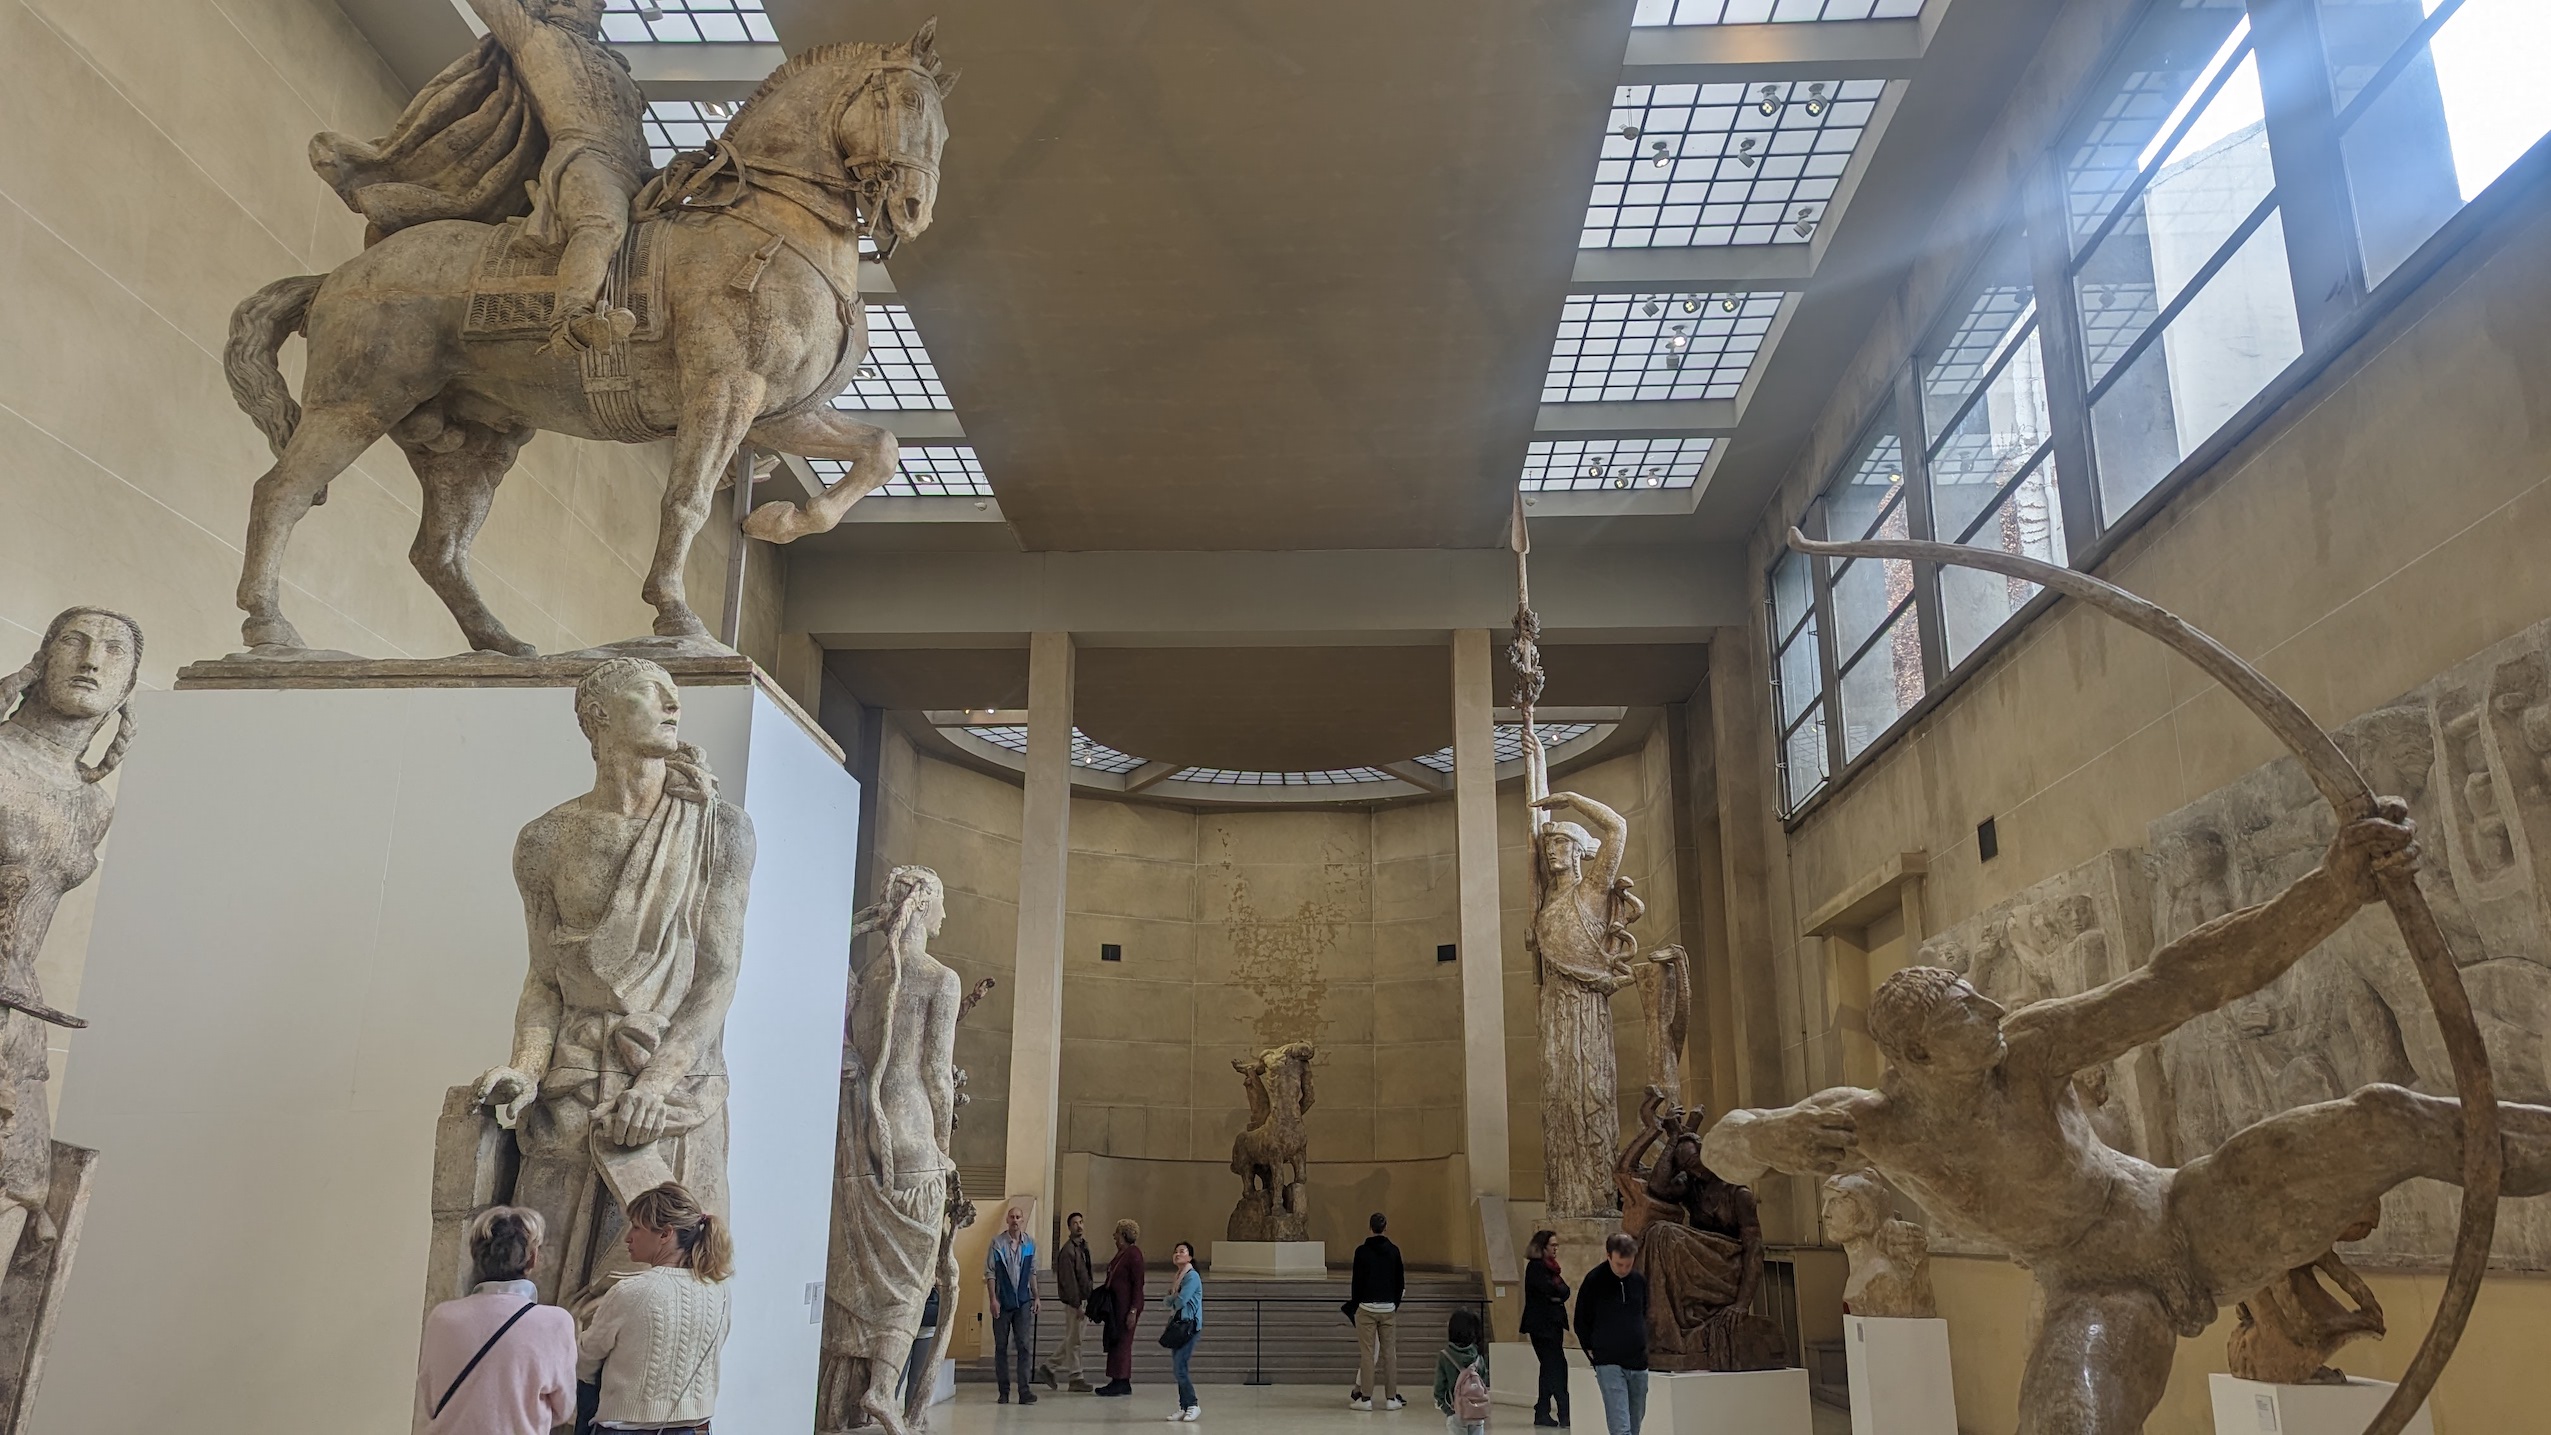 The Musée Bourdelle is filled with visitors, marveling at the statues.